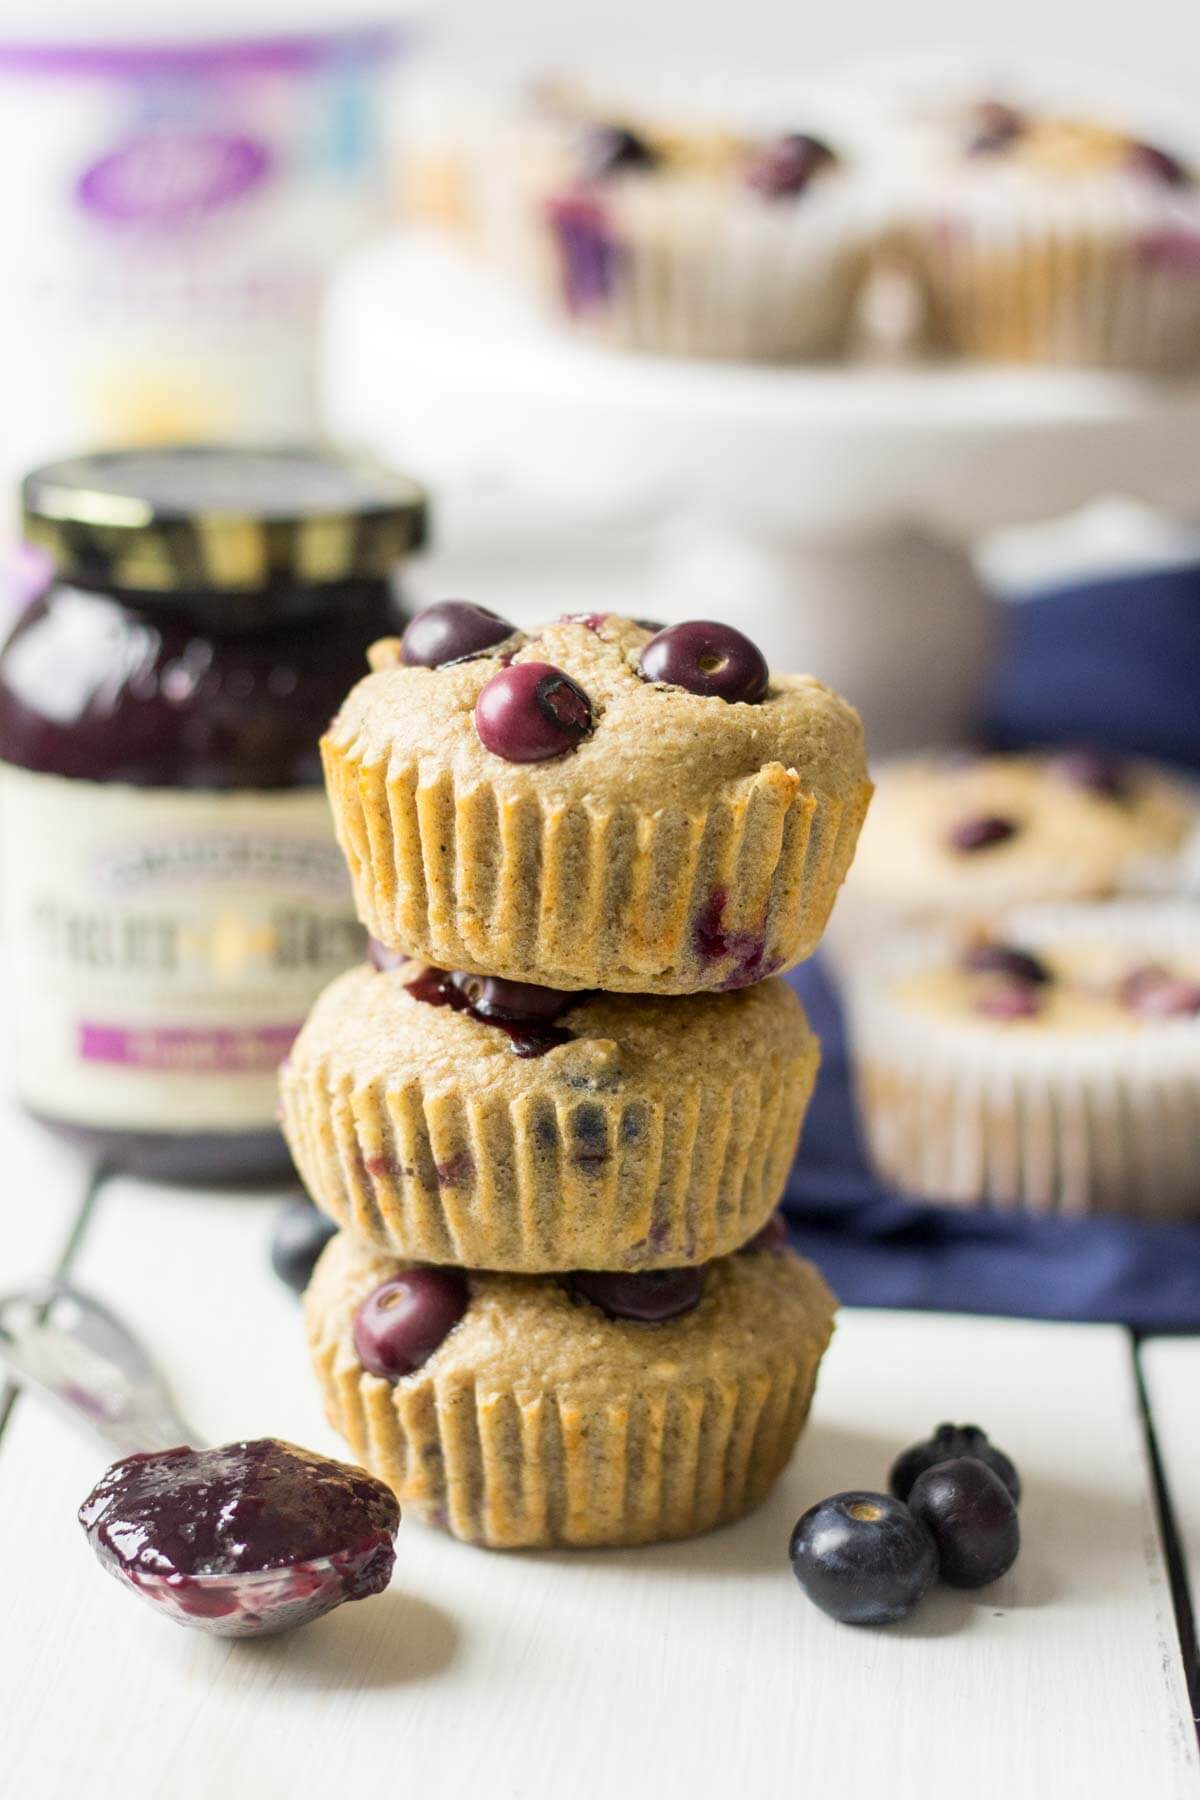 Easy to make and full of good-for-you ingredients, these triple berry blender muffins will show you just how easy and delicious breakfast can be. You will love the oats, blueberries, maple syrup and jam inside these easy muffins!